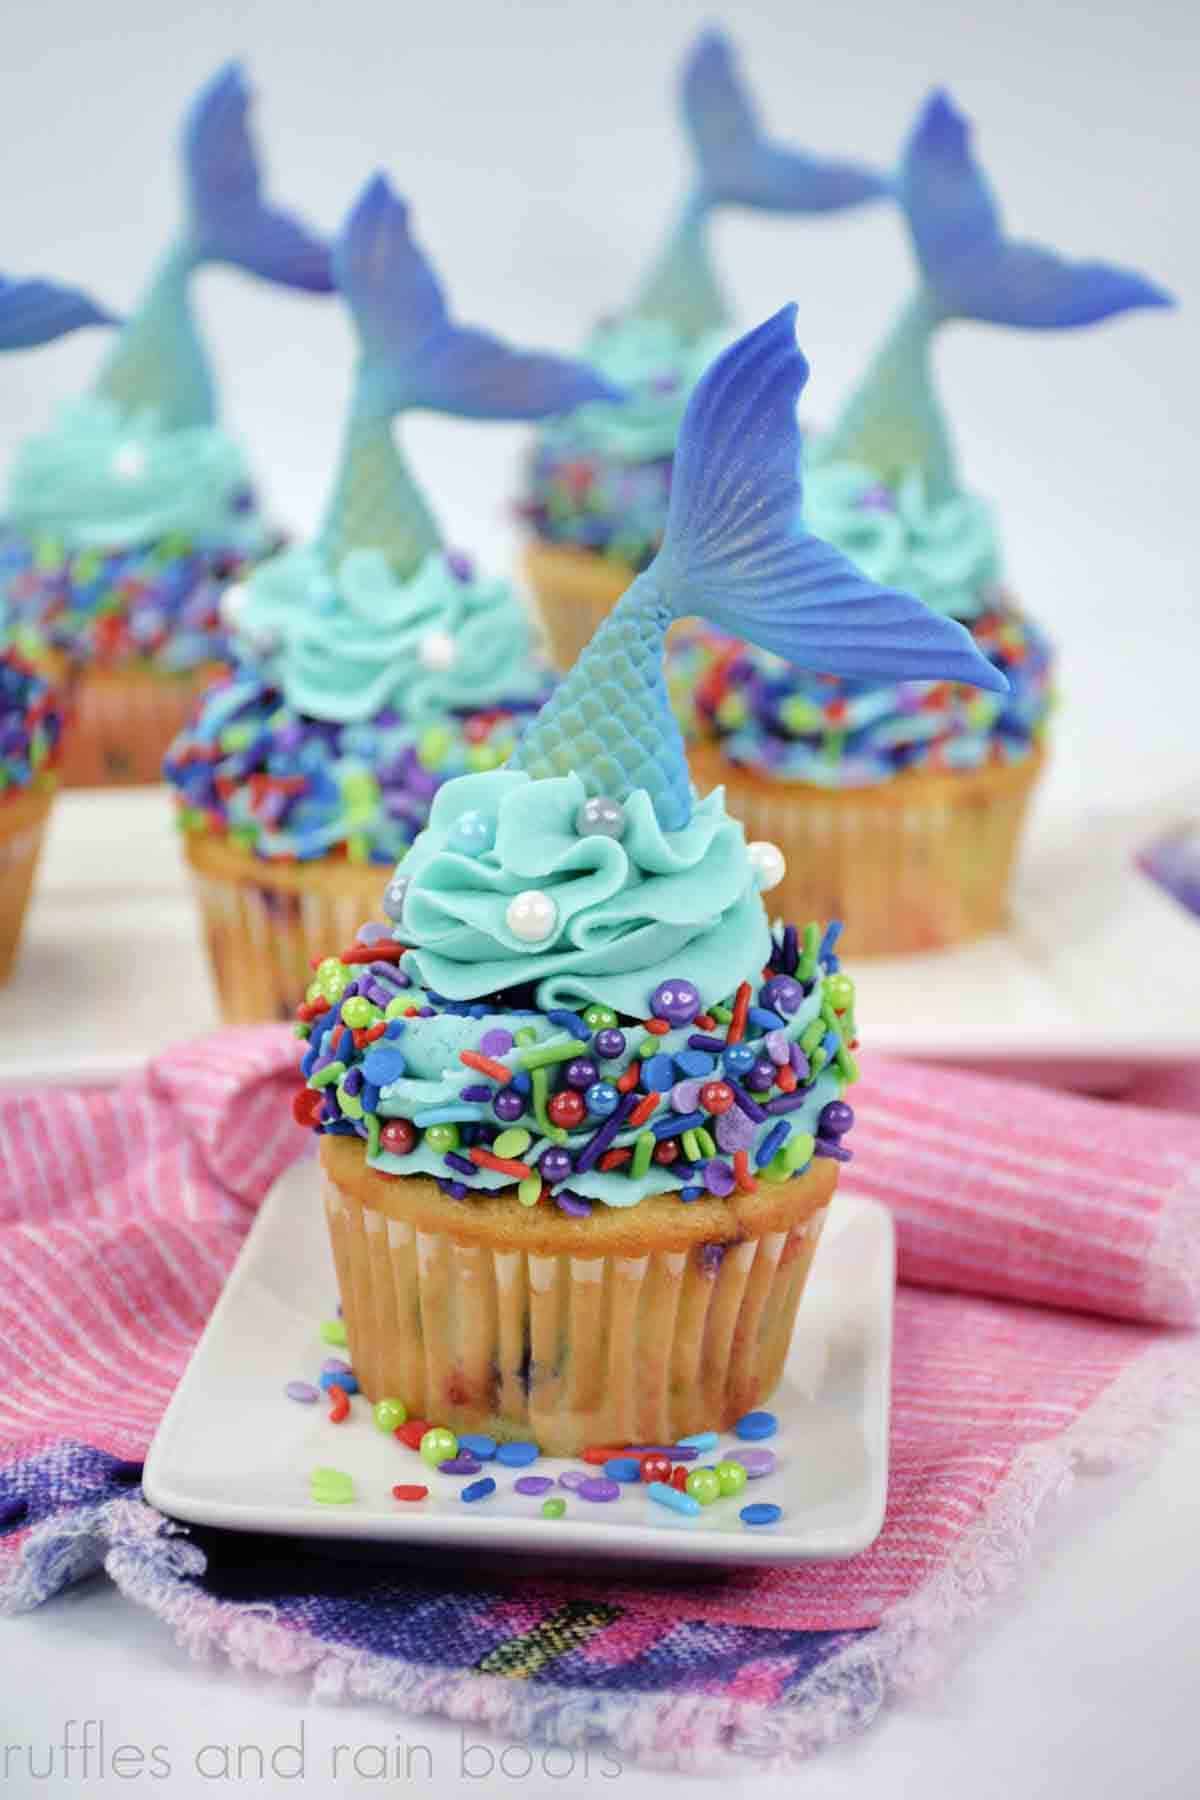 Vertical image of 6 mermaid cupcakes with funfetti cupcake recipe, buttercream frosting, sprinkles, and fondant mermaid tails.